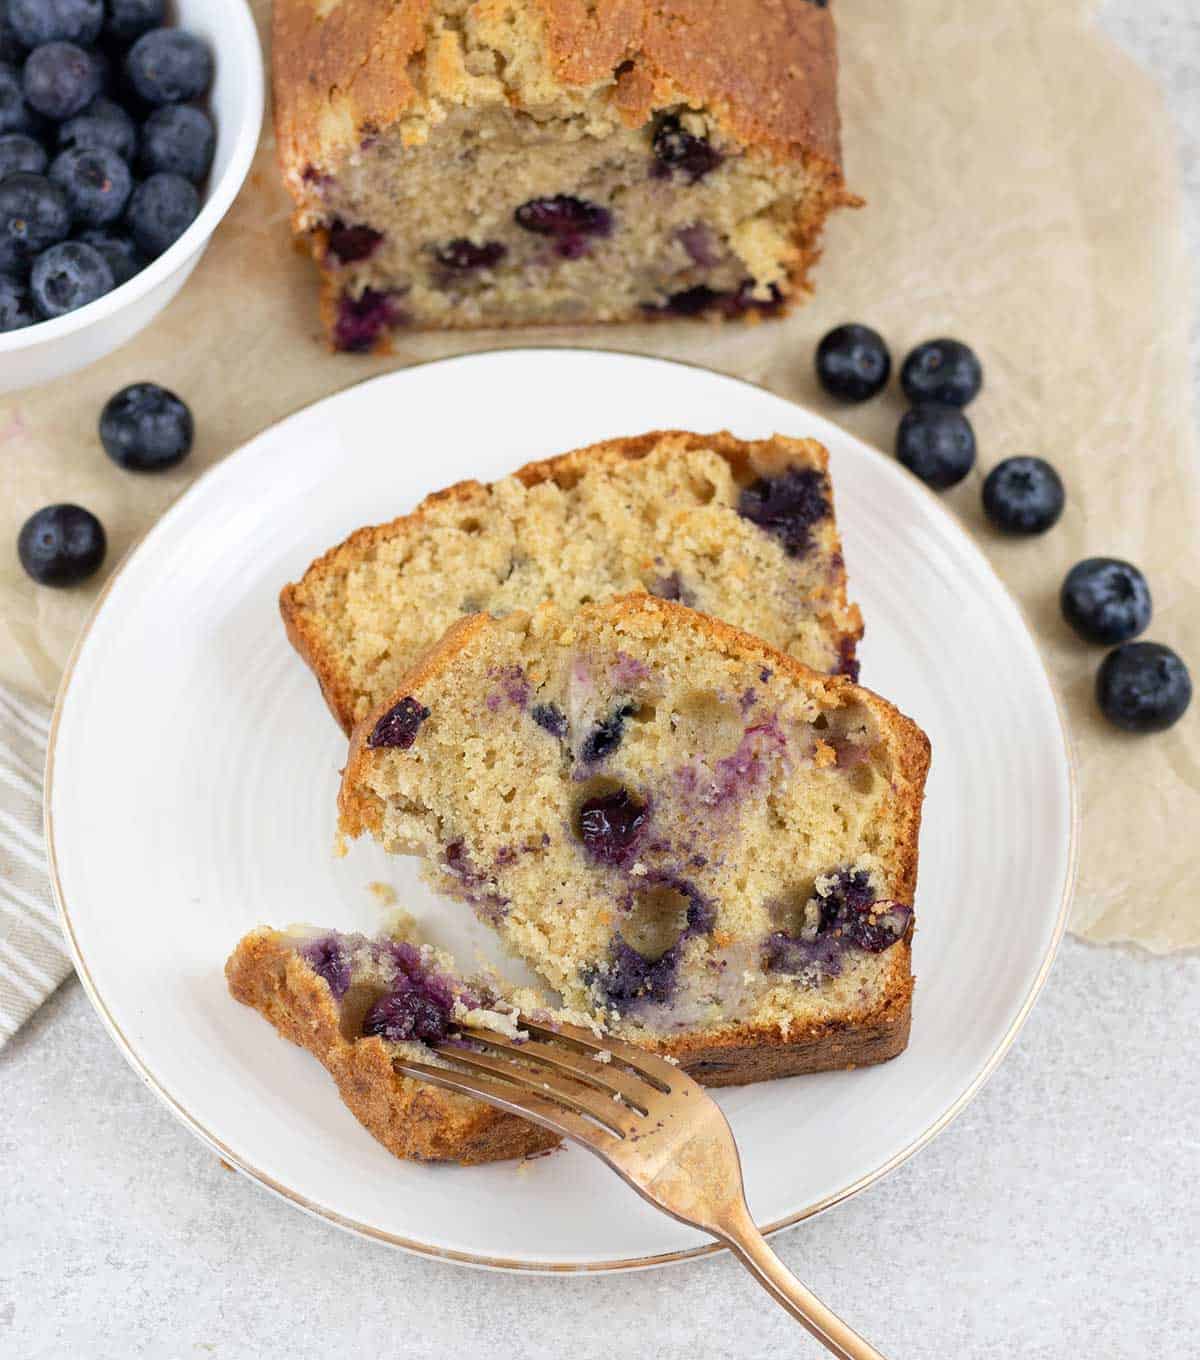 cut the Blueberry Banana Bread and some blueberries around it.